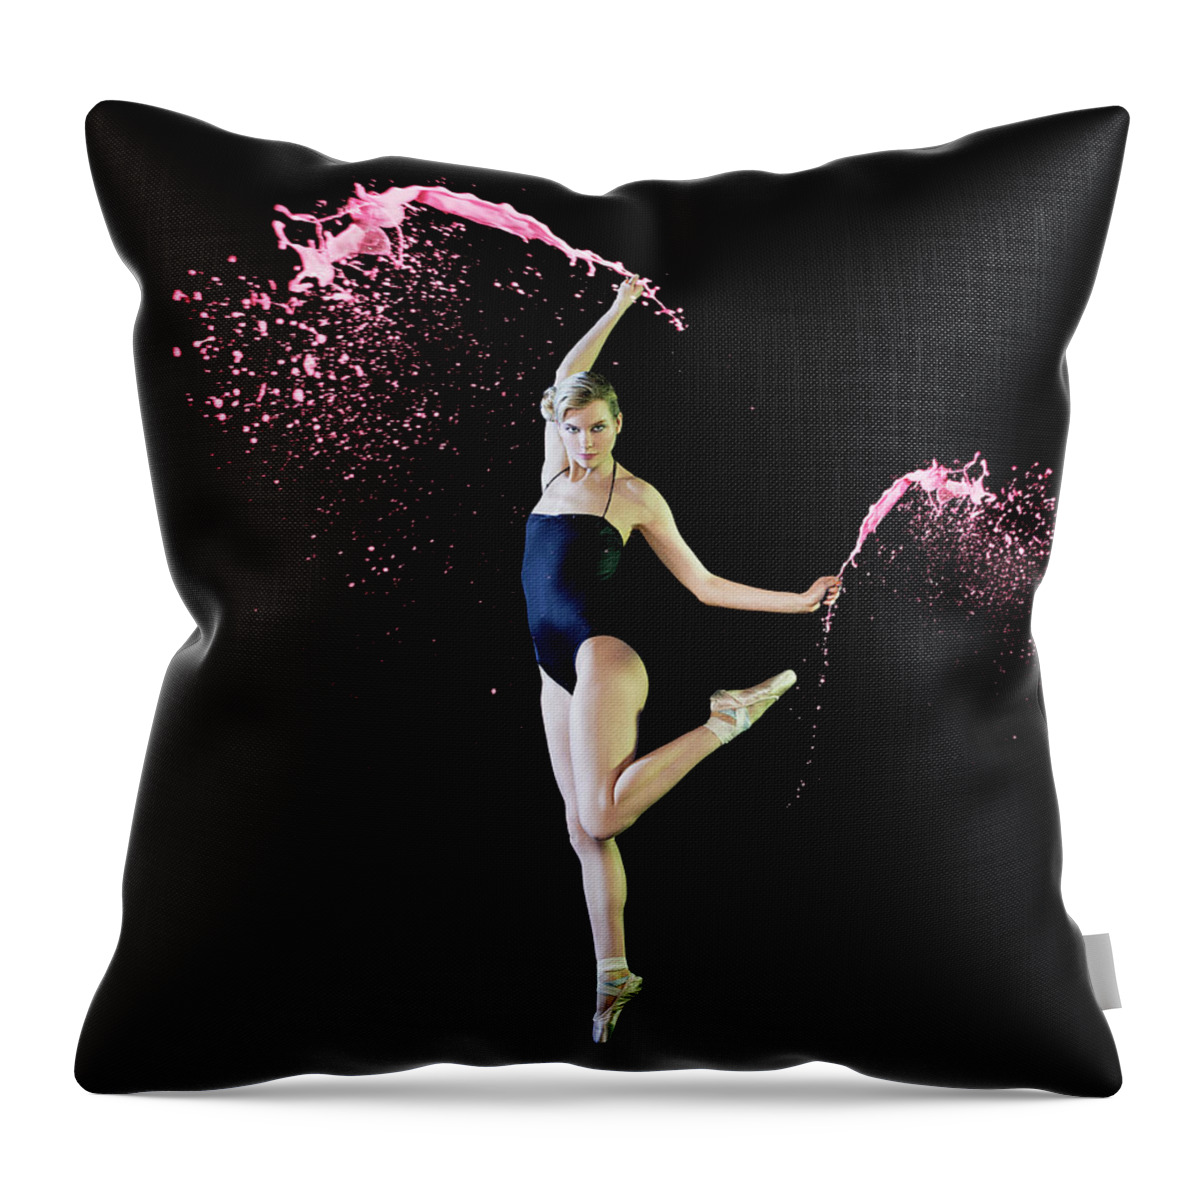 Ballet Dancer Throw Pillow featuring the photograph Ballet Dancer Dancing With Pink Paint by Tara Moore